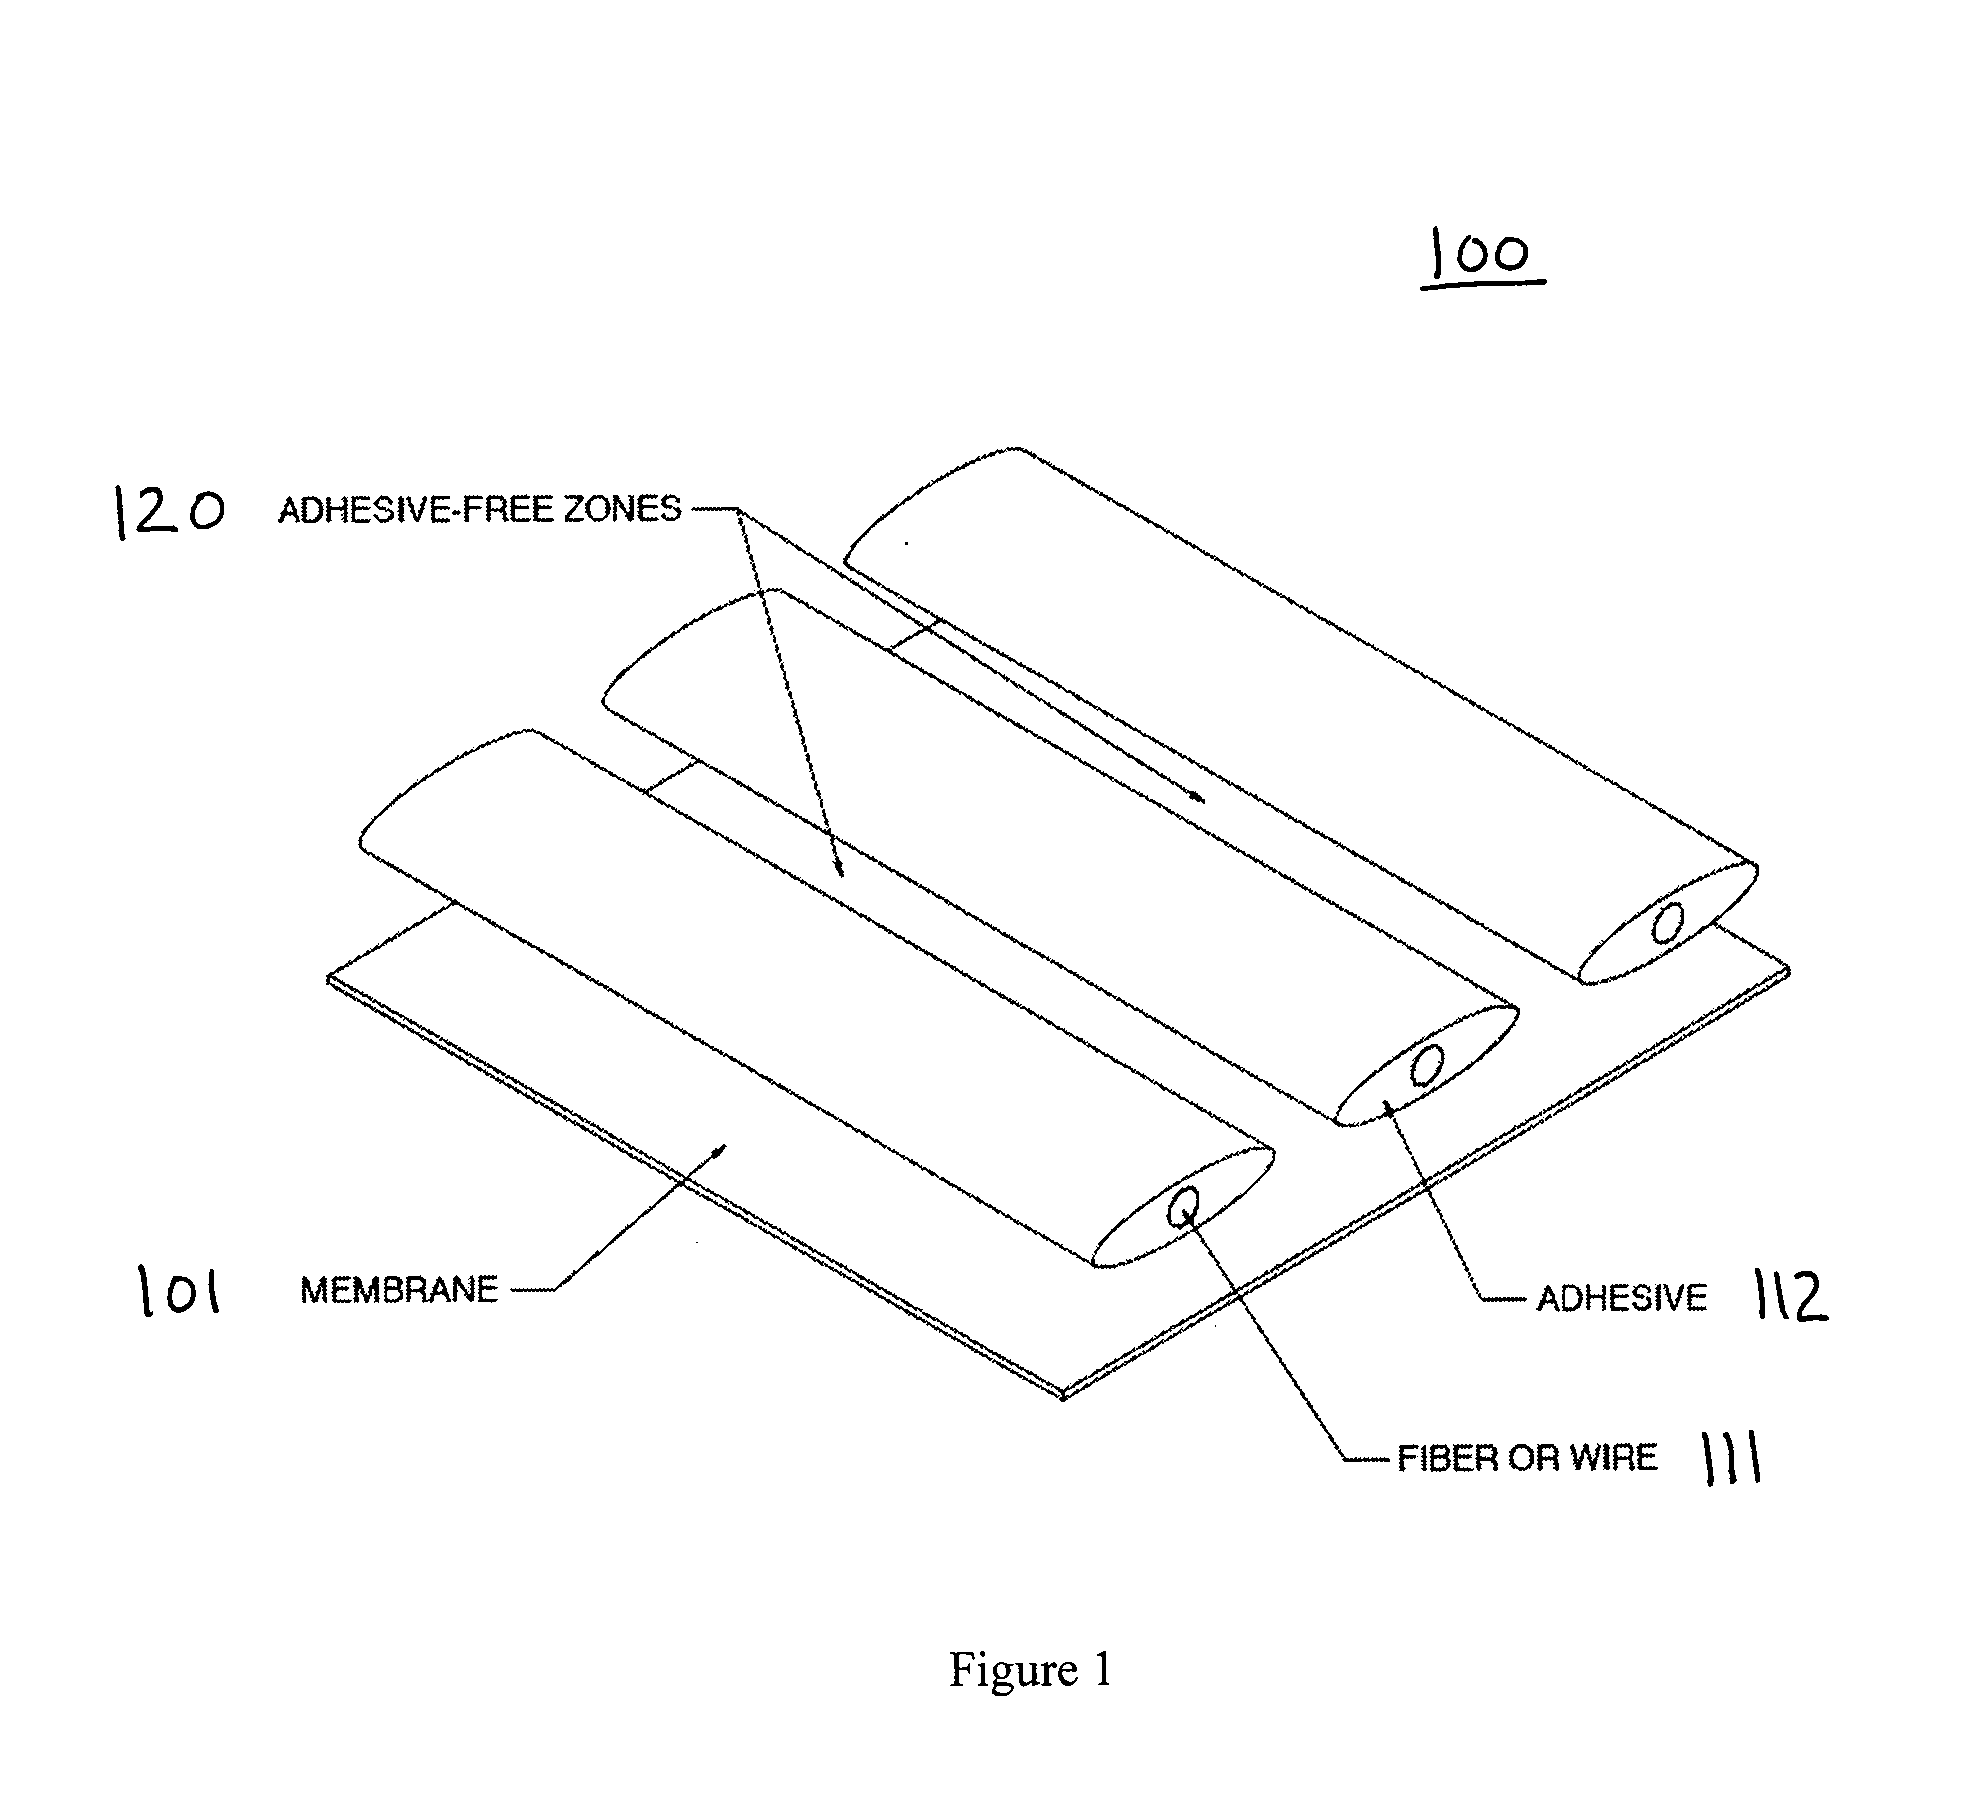 Waterproof breathable composite materials for fabrication of flexible membranes and other articles